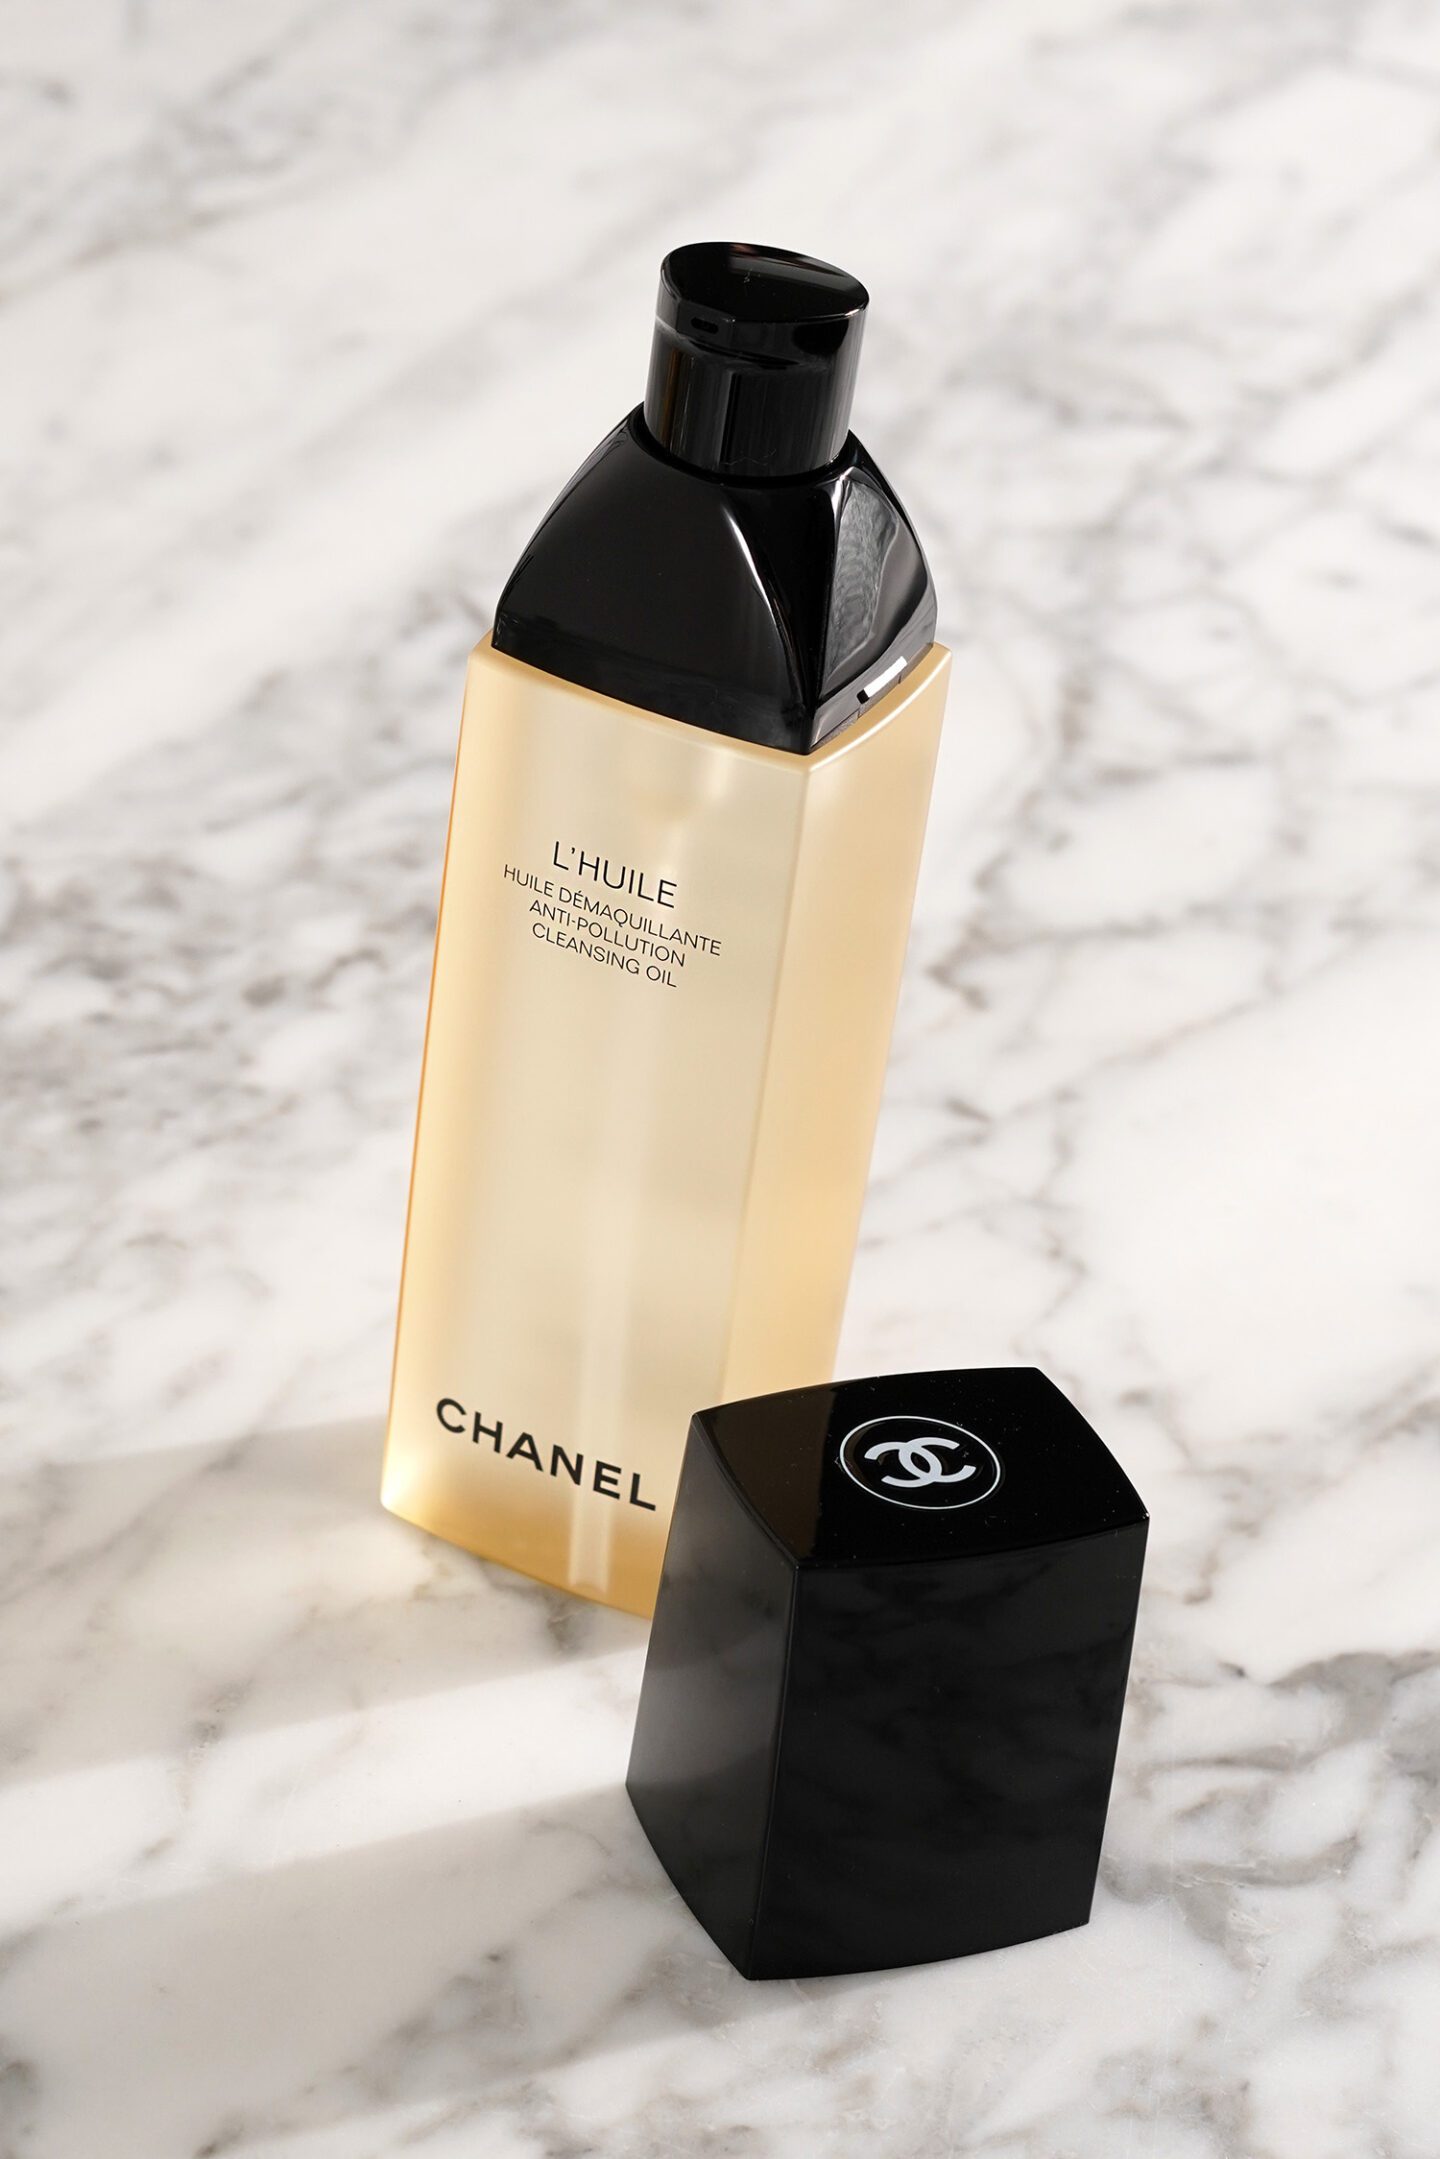 Chanel L’Huile Anti-Pollution Cleansing Oil